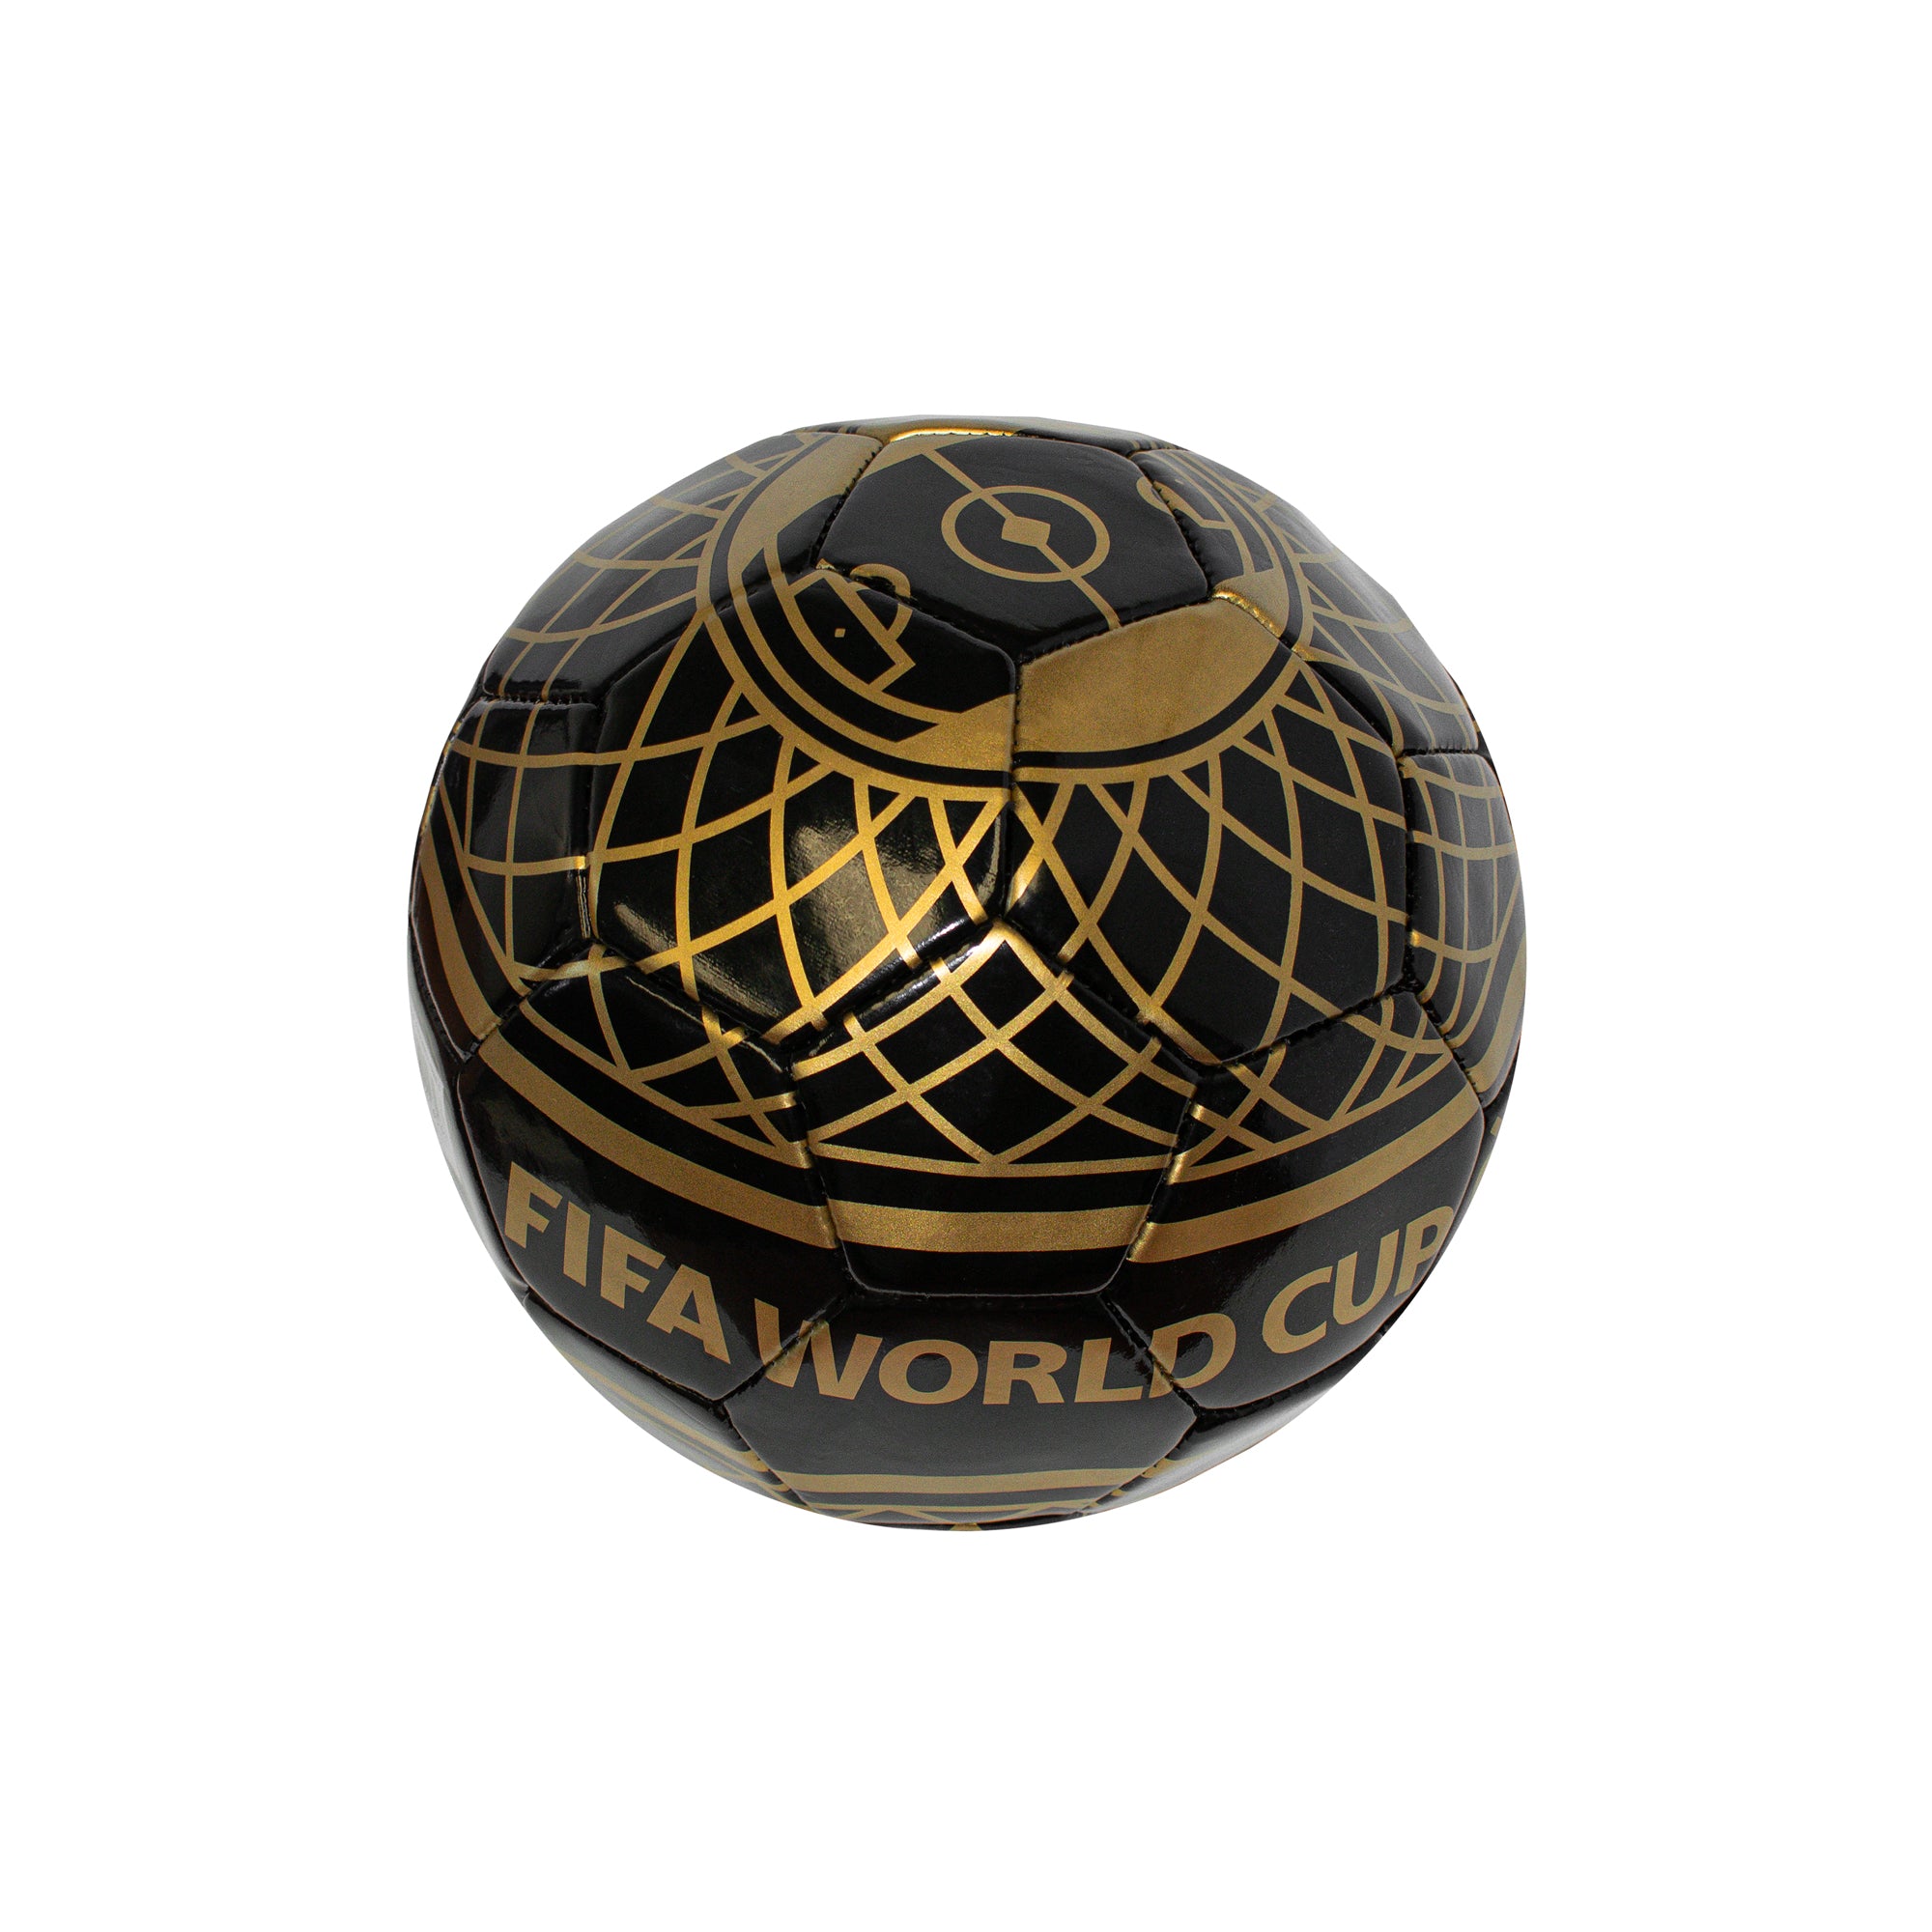 FIFA WORLD CUP 2022 – BLACK AND GOLD TROPHY BALL (SIZE 5)